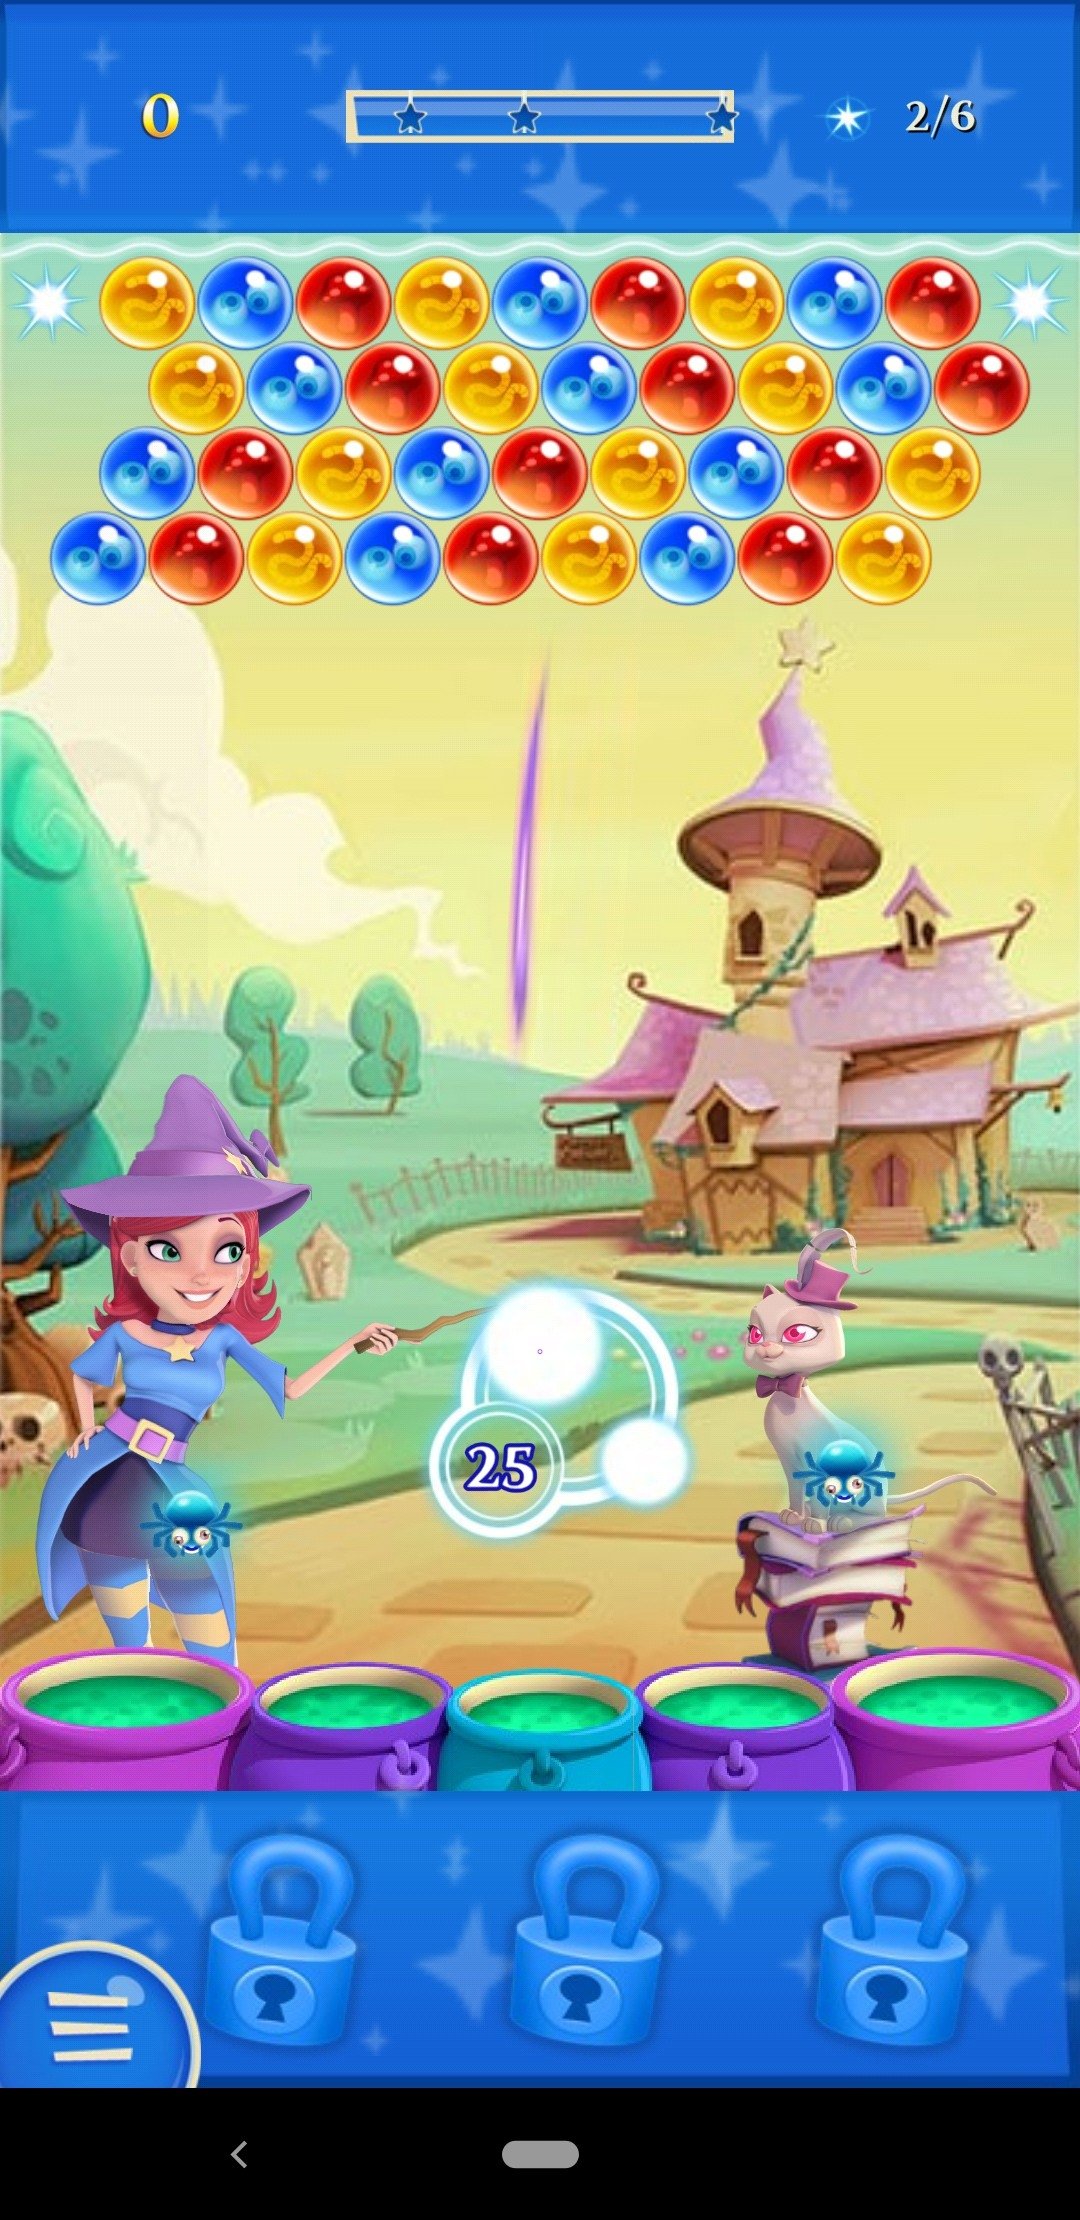 how to get free gold bars in bubble witch saga 3 using cheat engine